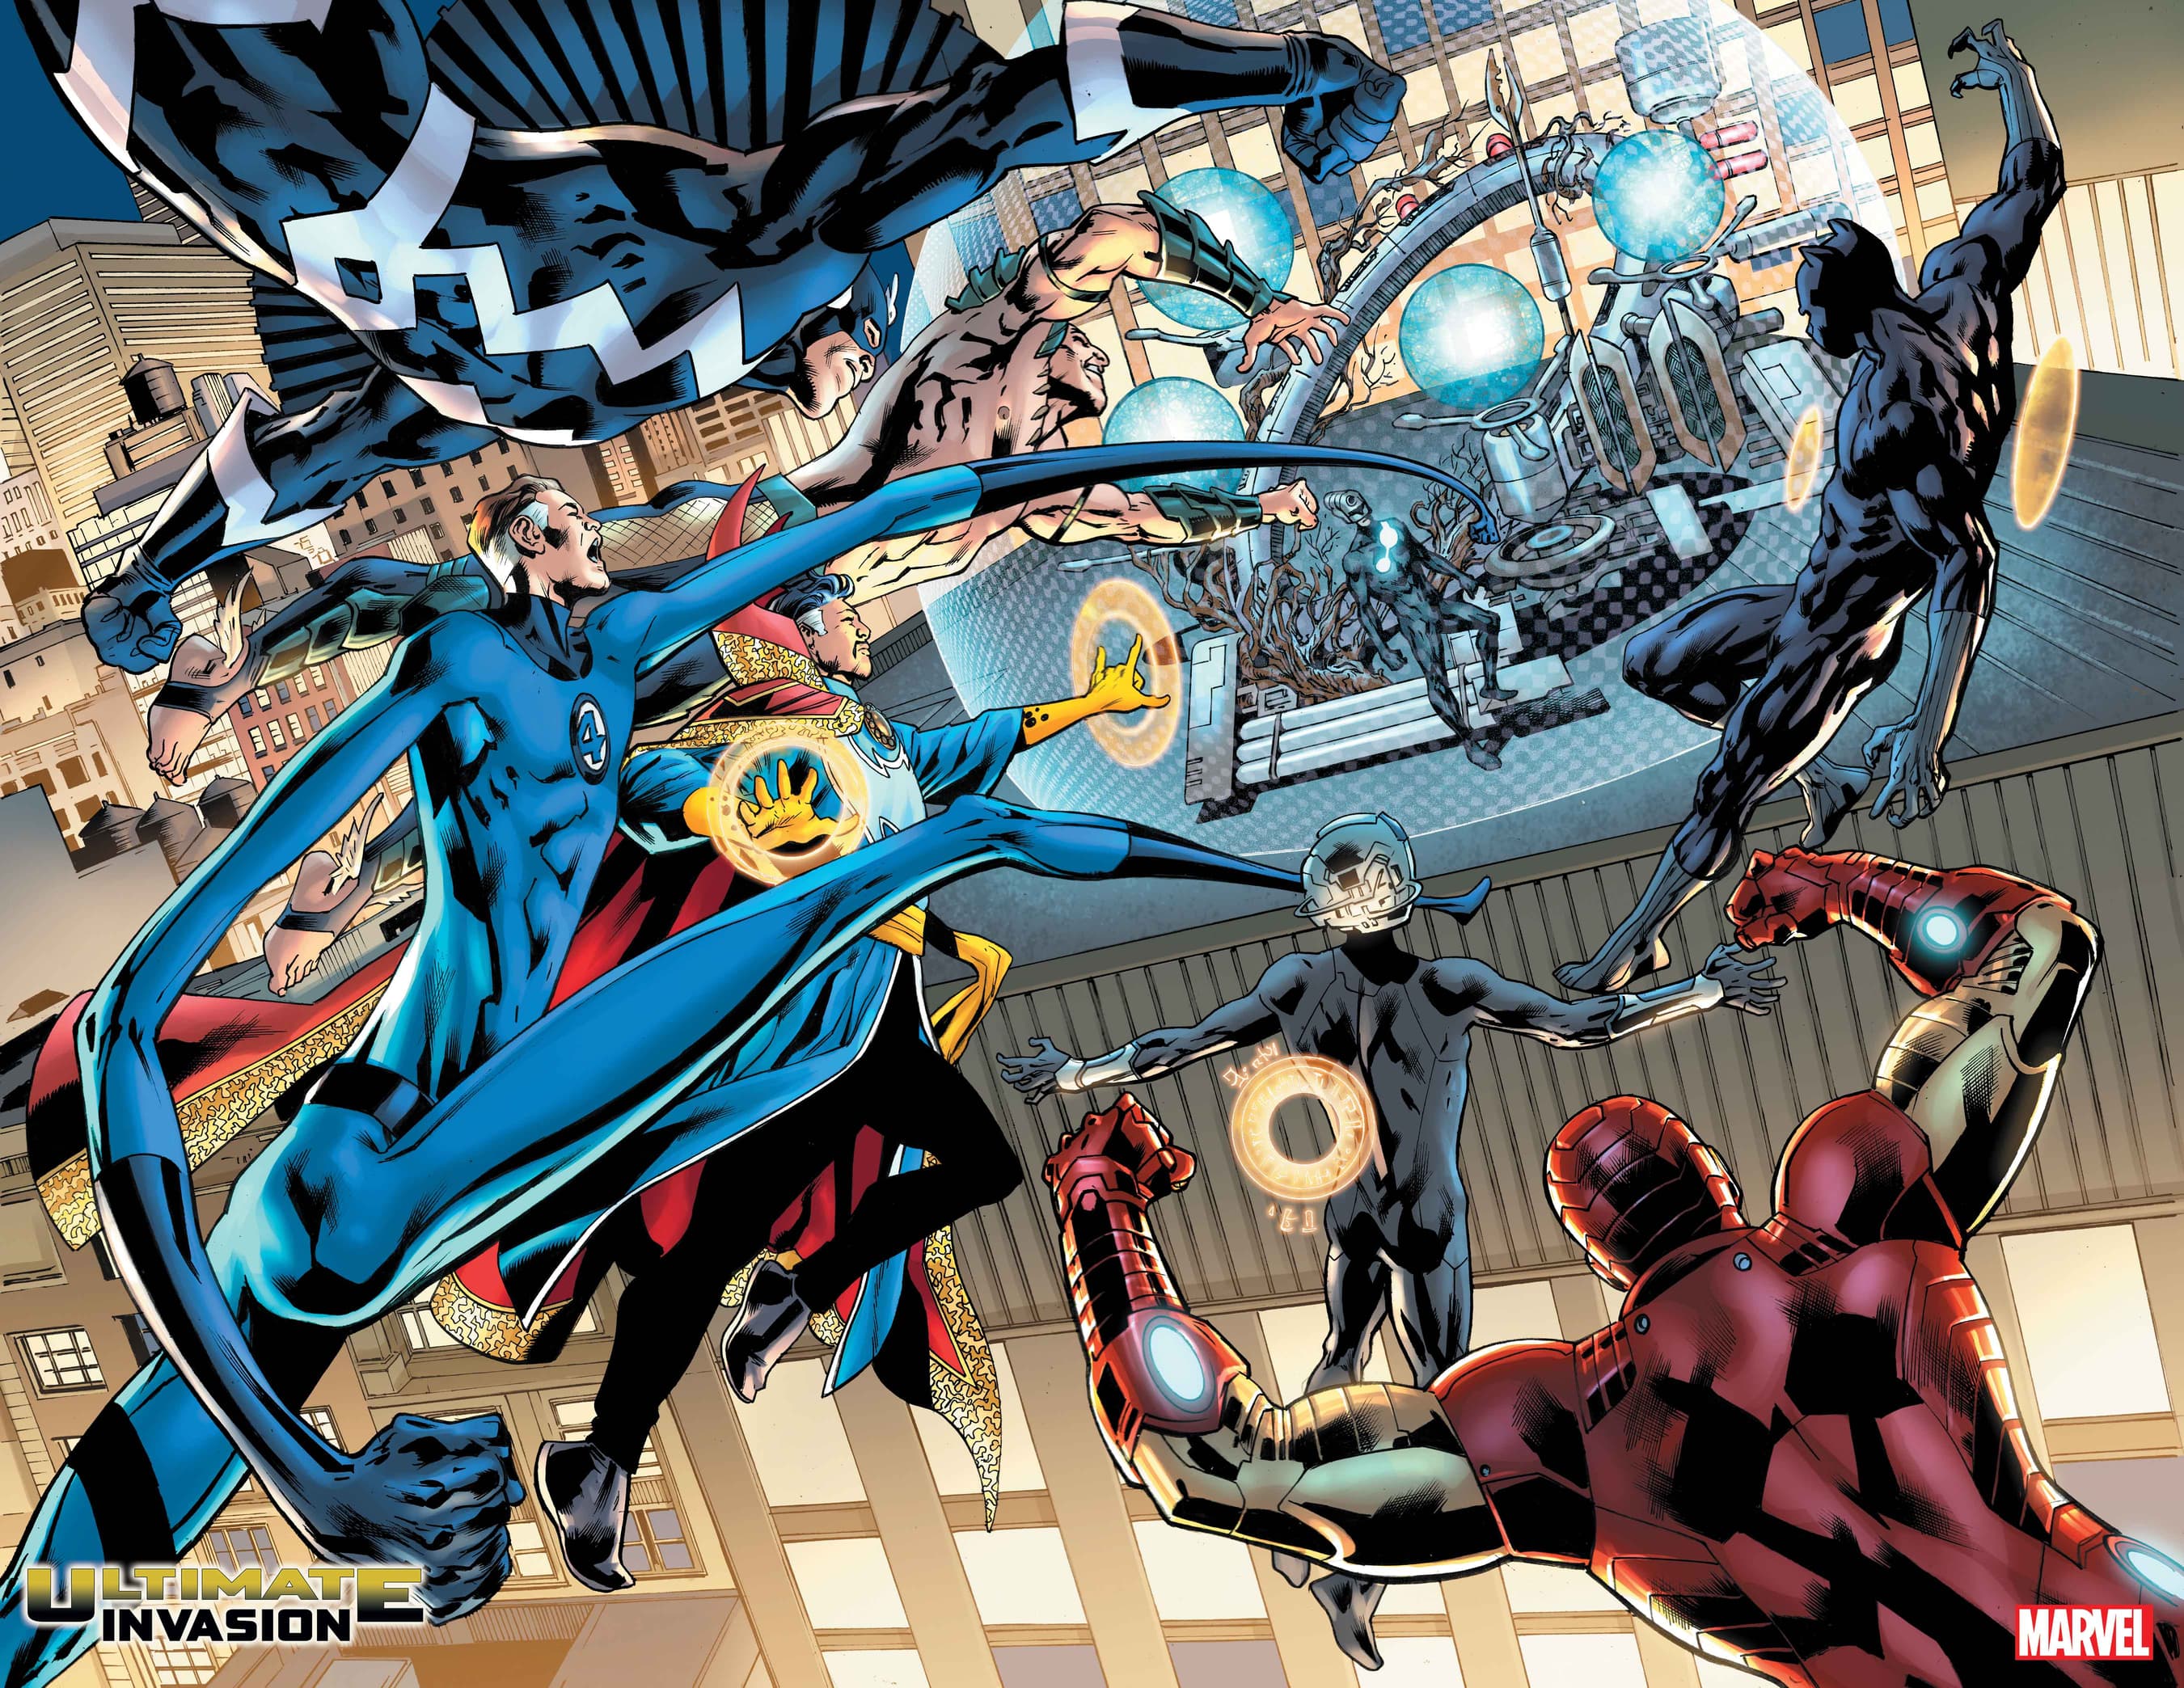 ULTIMATE INVASION (2023) #1 artwork by Bryan Hitch and Alex Sinclair